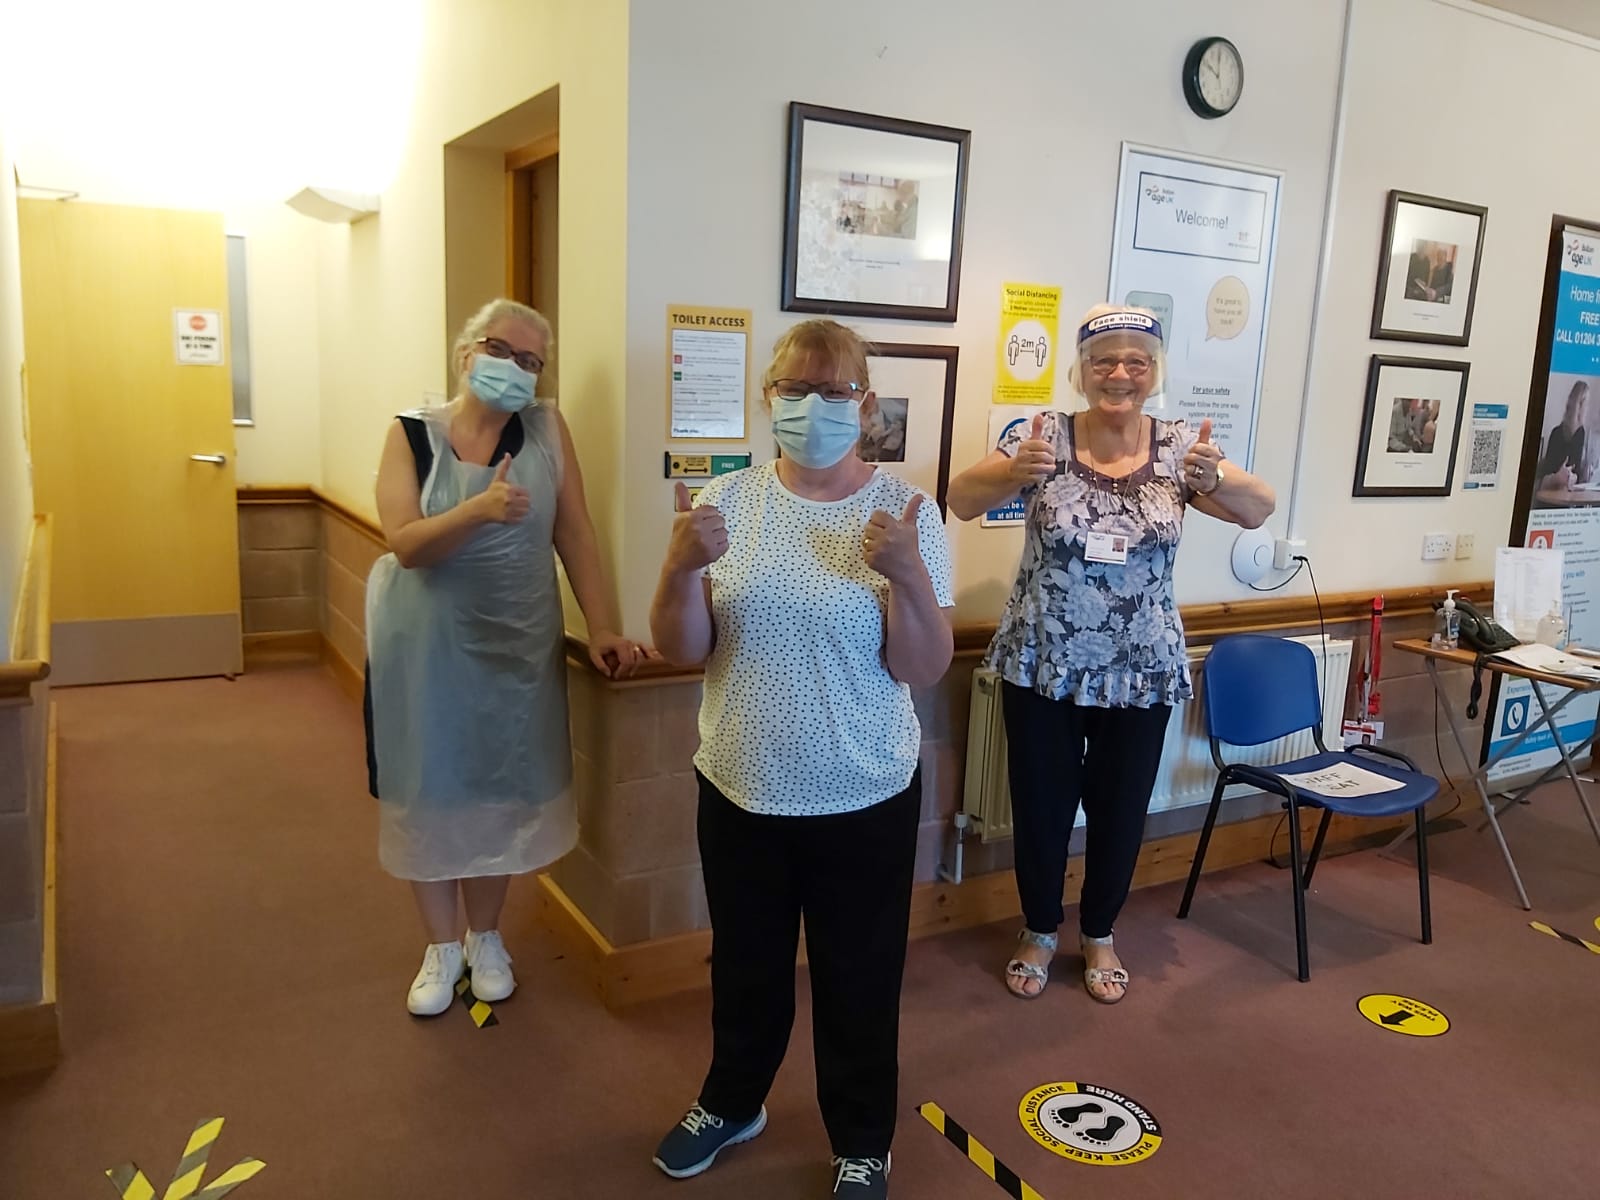 Holistic therapy sessions taking place with PPE